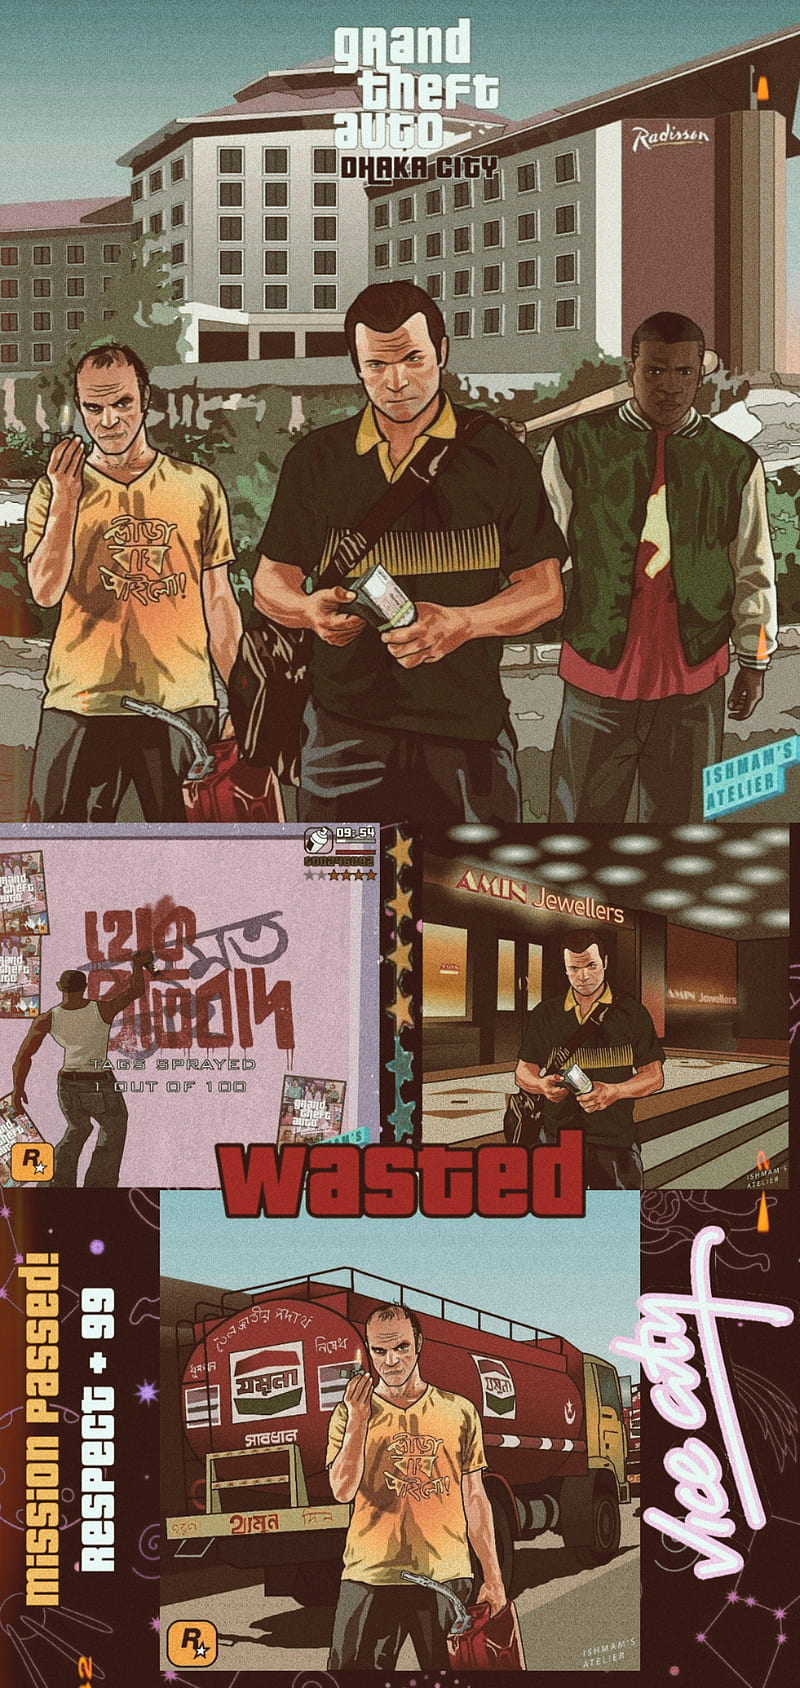 60 Marvelous Game iPhone Wallpapers For Gamers  Grand theft auto artwork Gta  5 Gta v iphone wallpaper